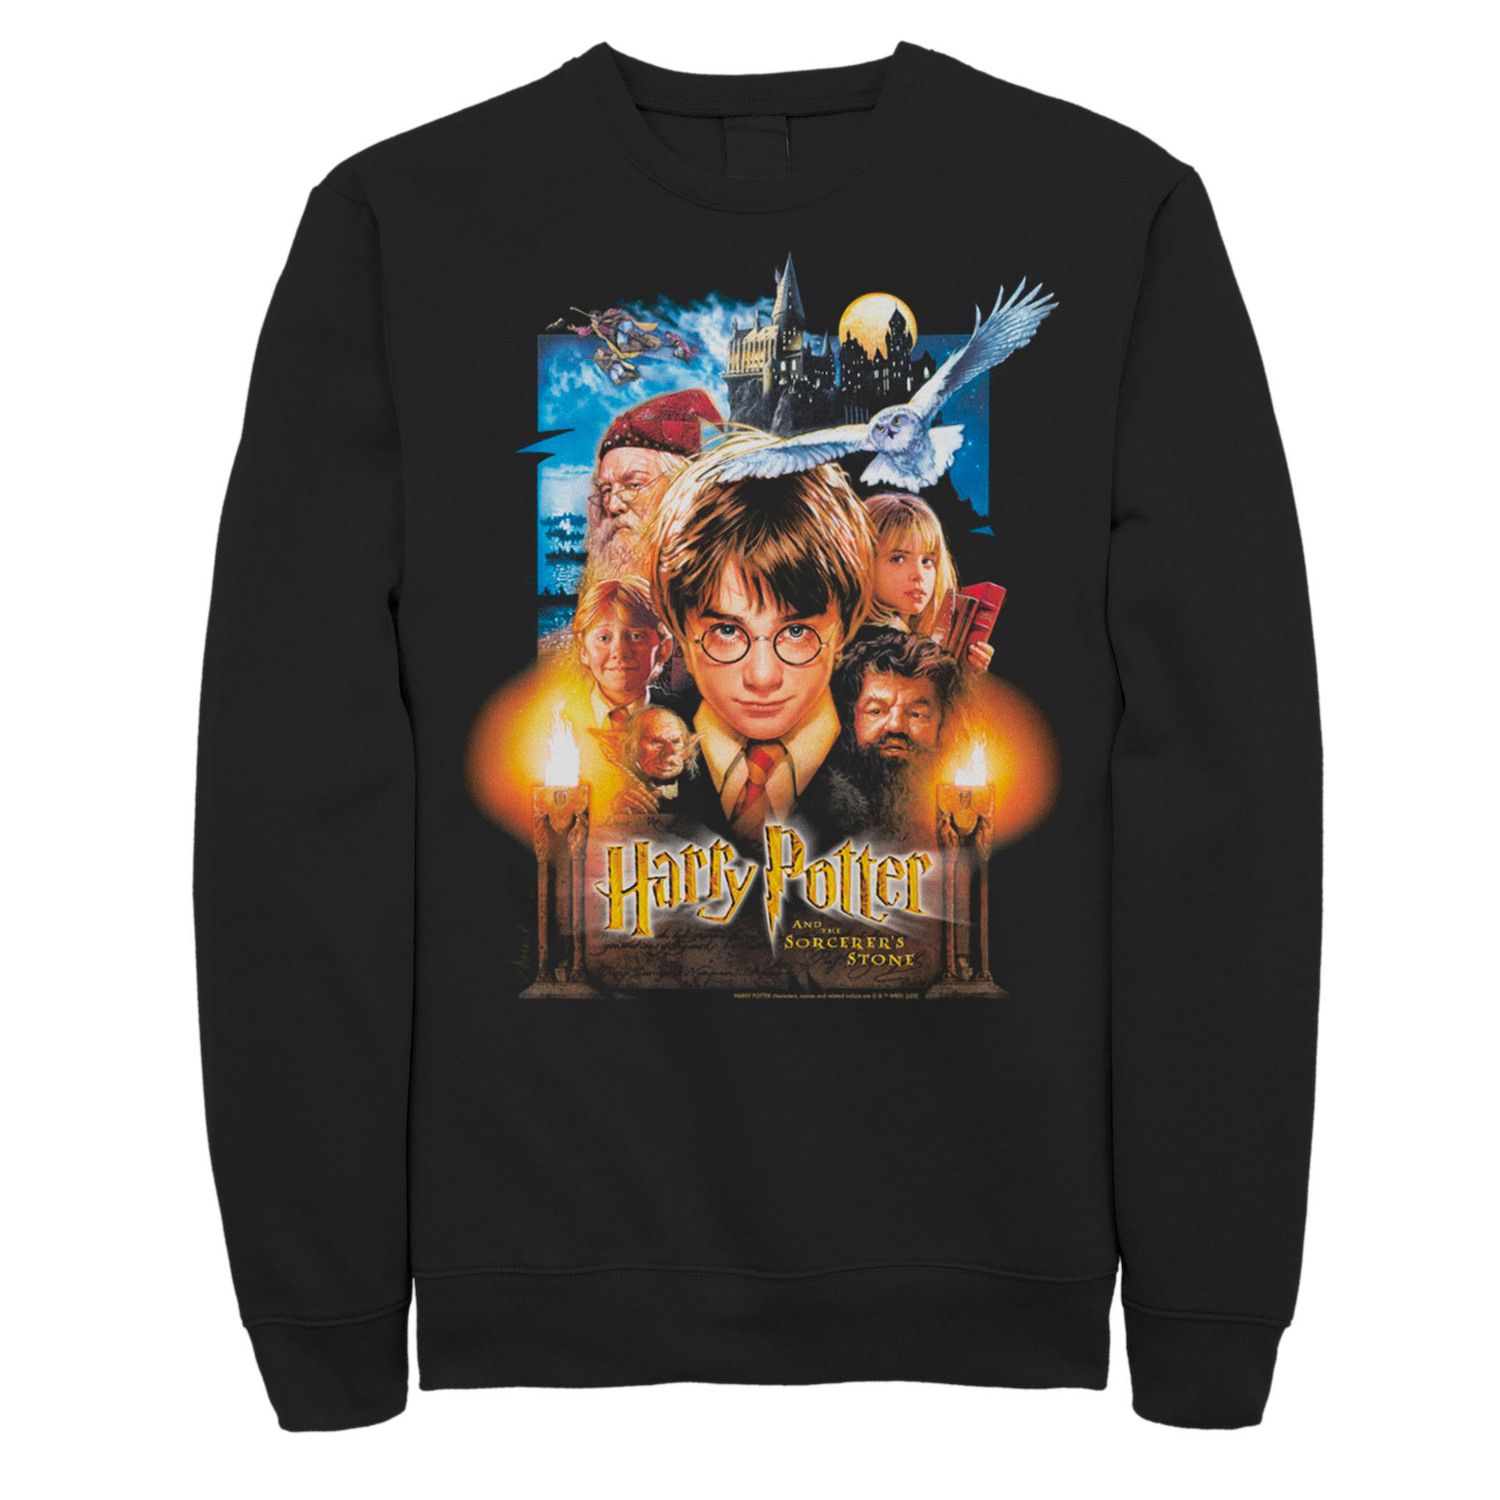 Image for Harry Potter Men's And The Sorcerer's Stone Poster Sweatshirt at Kohl's.